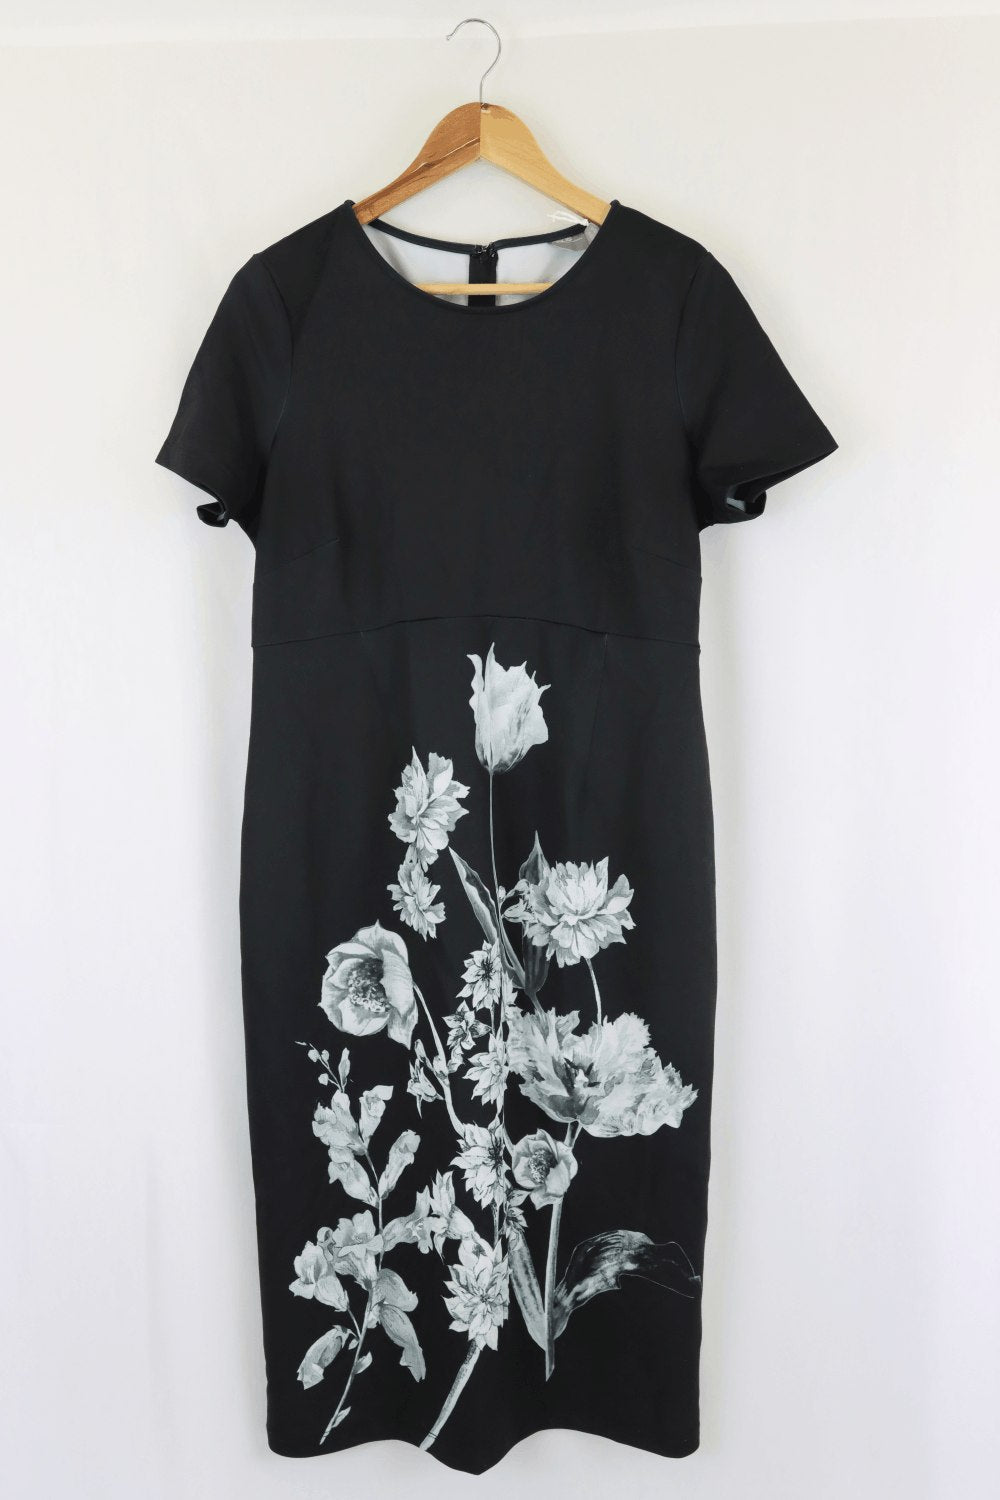 Asos Black Dress With Flowers 12